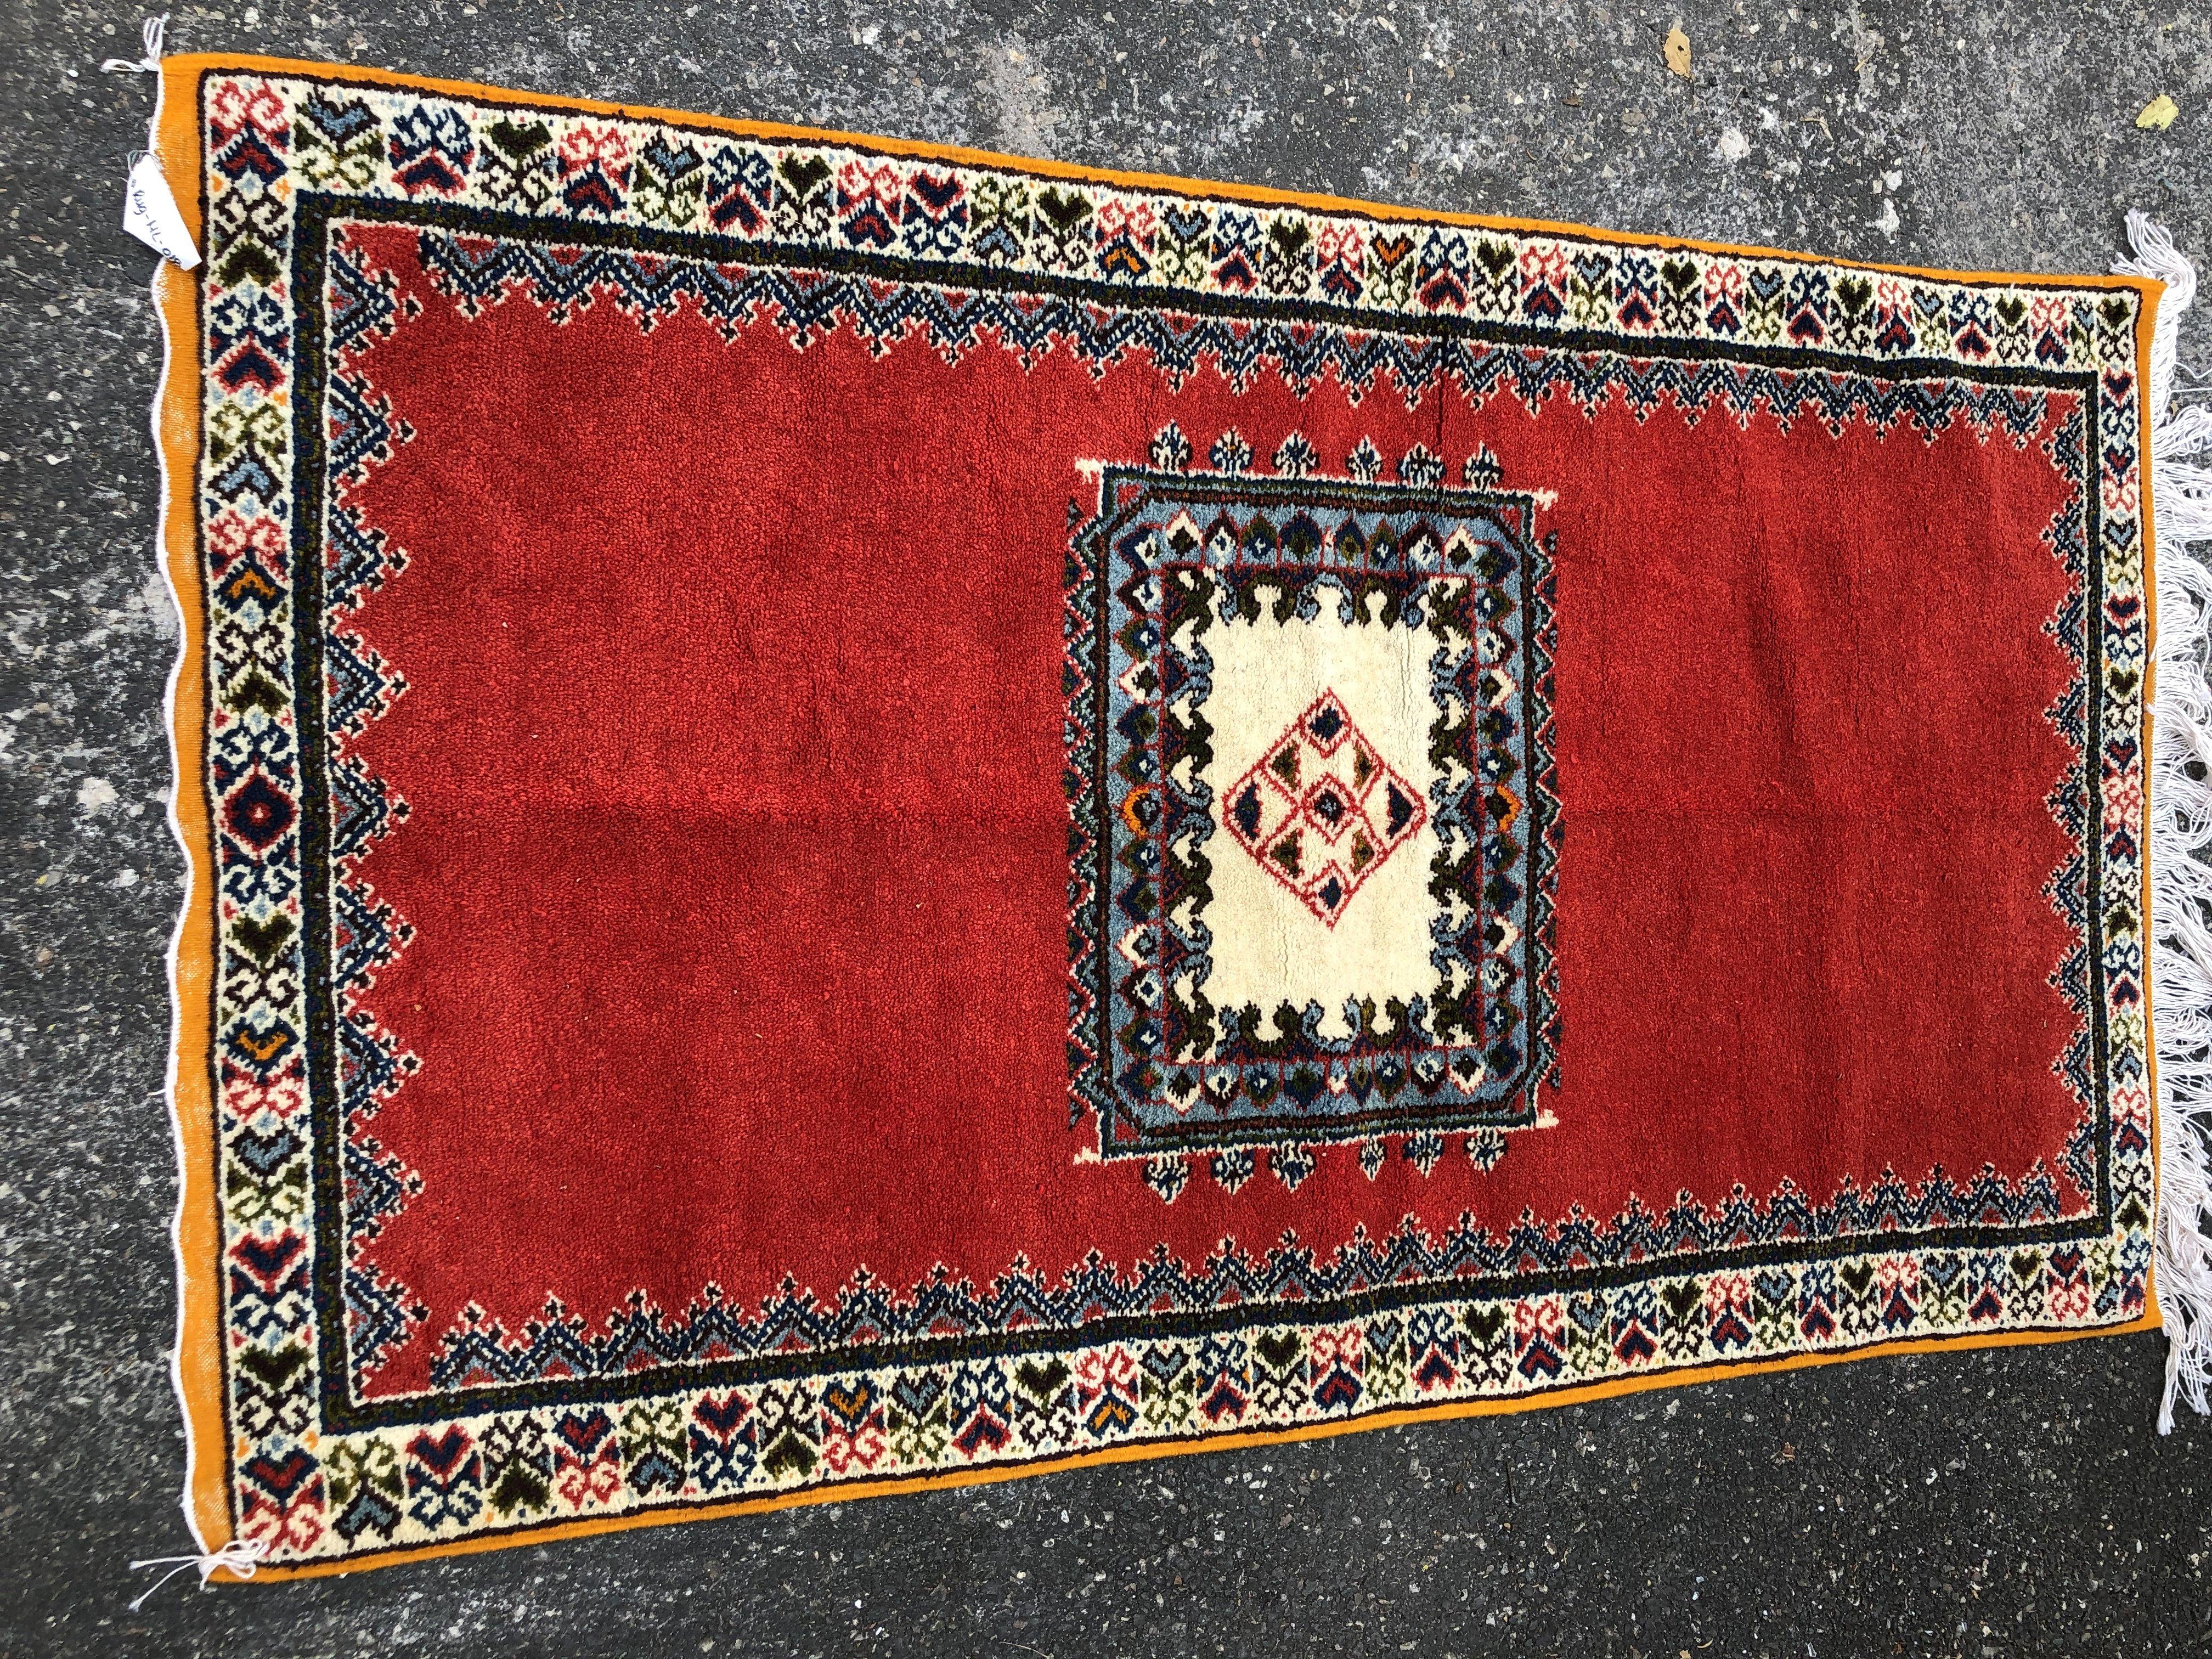 A stunning handmade vintage tribal Moroccan rectangular shaped rug featuring bold geometric patterns. The rug is finely made of high quality wool sheep and deep and vivid all natural dyes. The rug features majestic patterns with berber design motifs